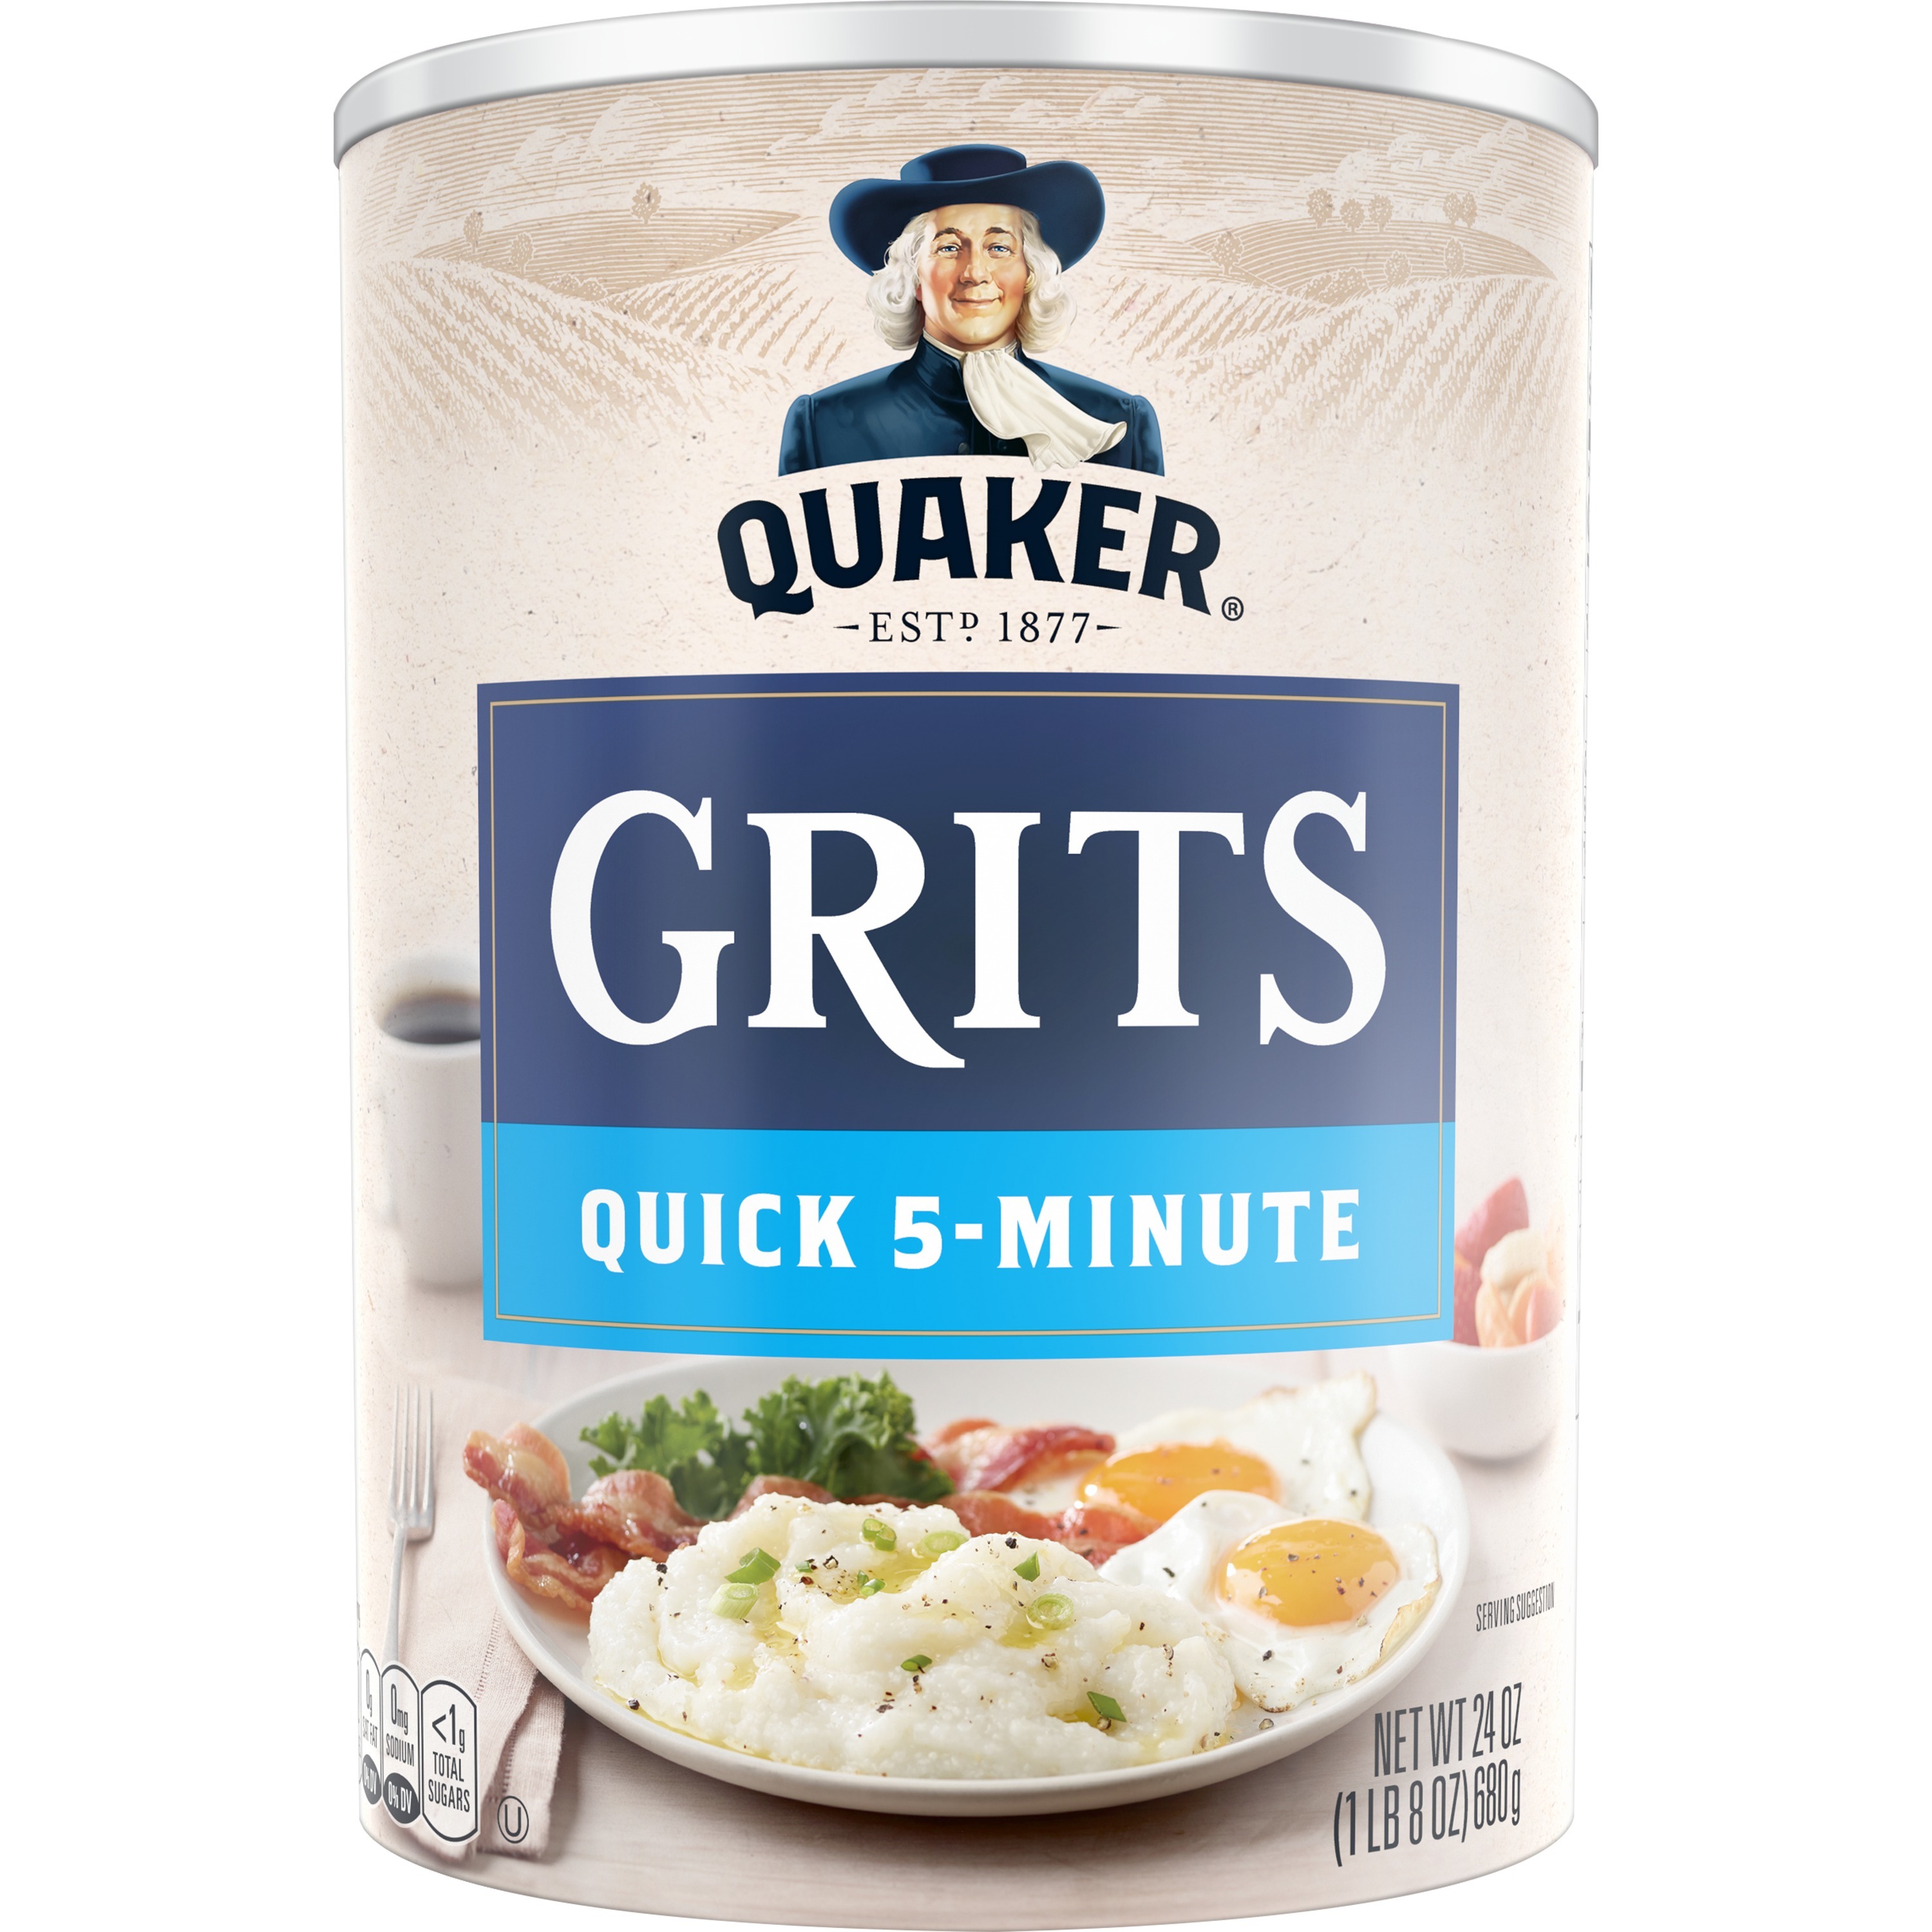 Quaker, Original Quick 5-Minute Grits, Shelf Stable, Ready to Cook, 24 oz Canister - image 2 of 7